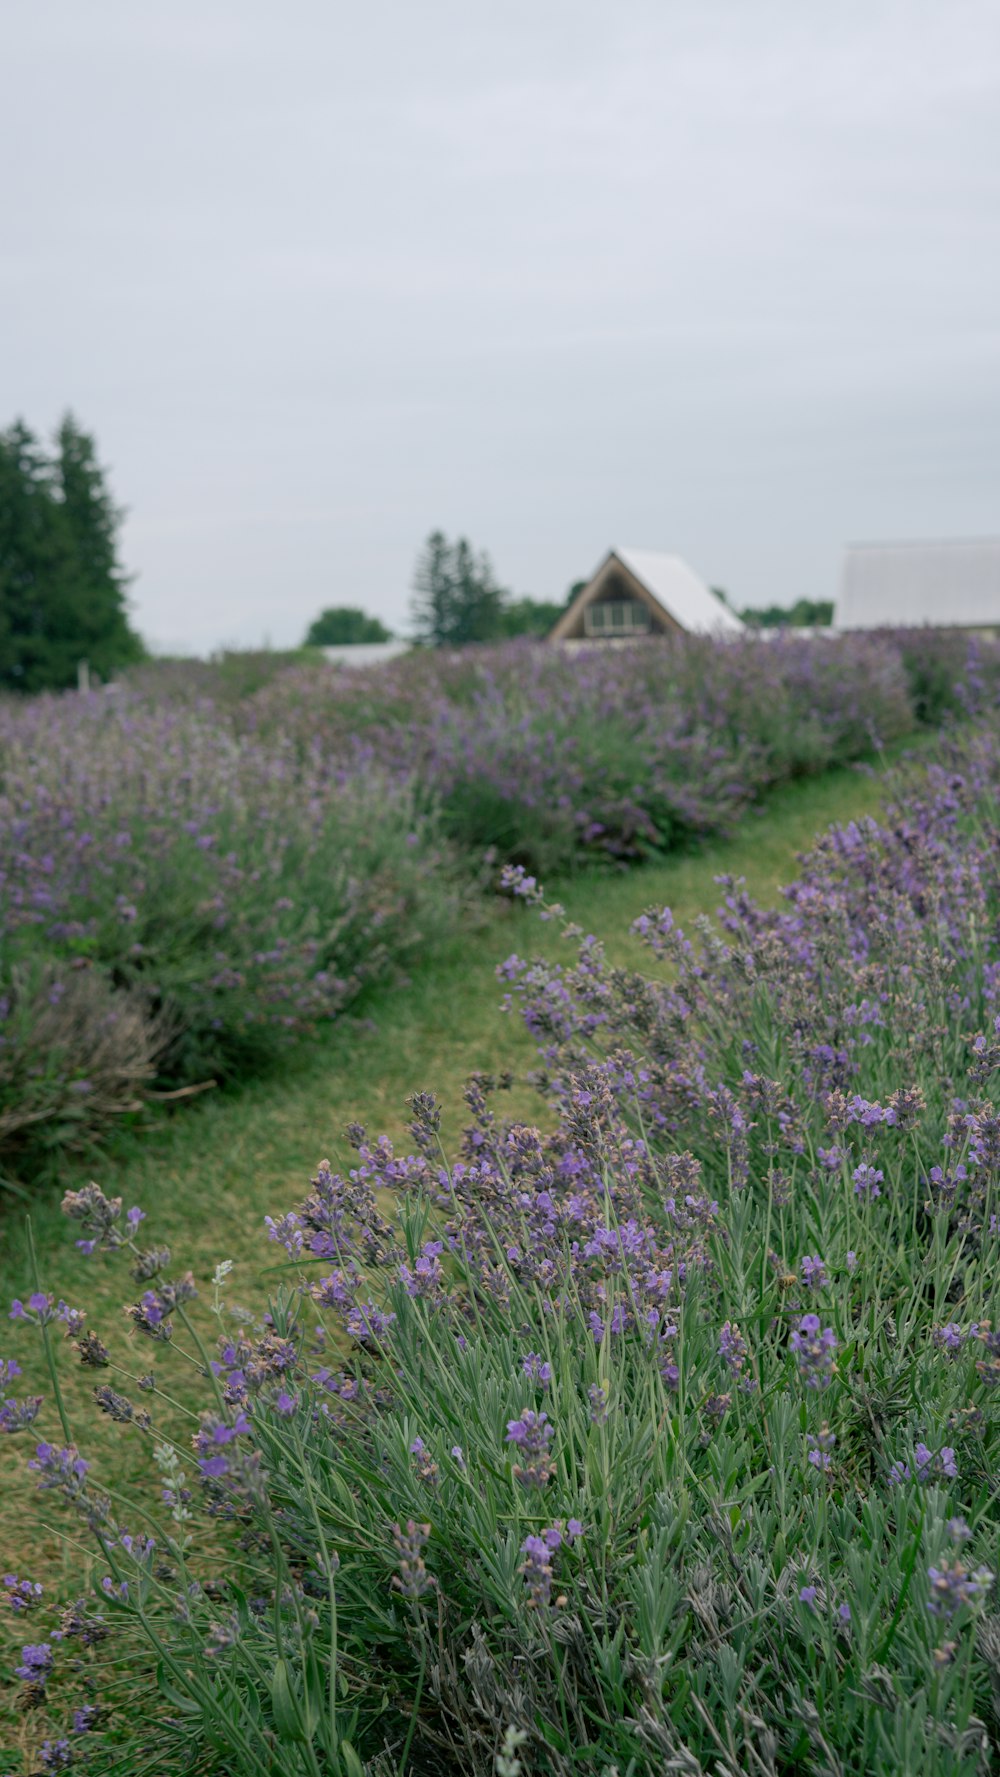 a field of lavender flowers with a barn in the background